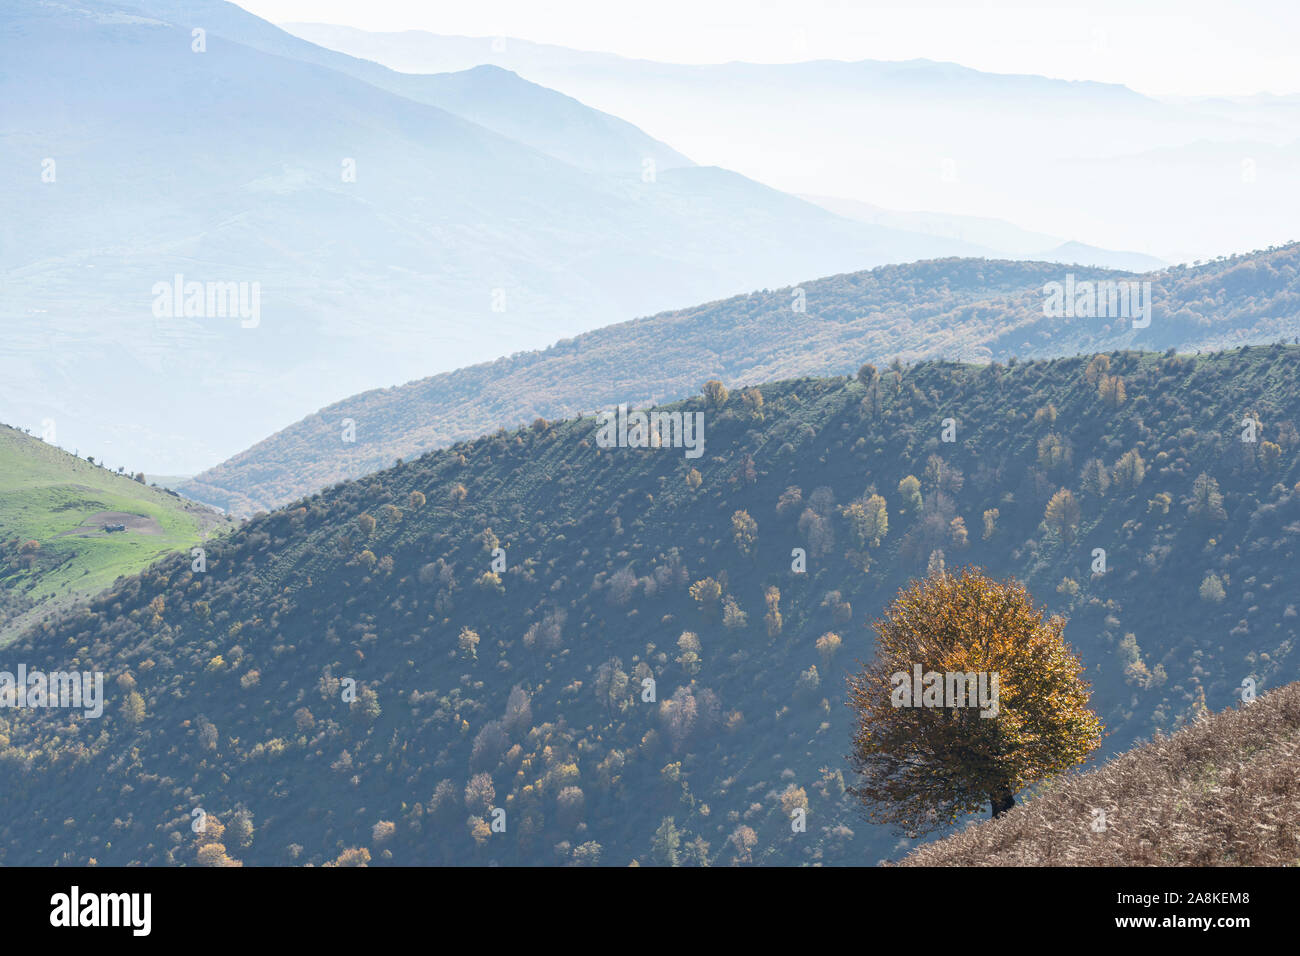 Stunning autumn nature landscape with a single tree at foreground, Arial perspective mist in the background. Horizontal shot Stock Photo